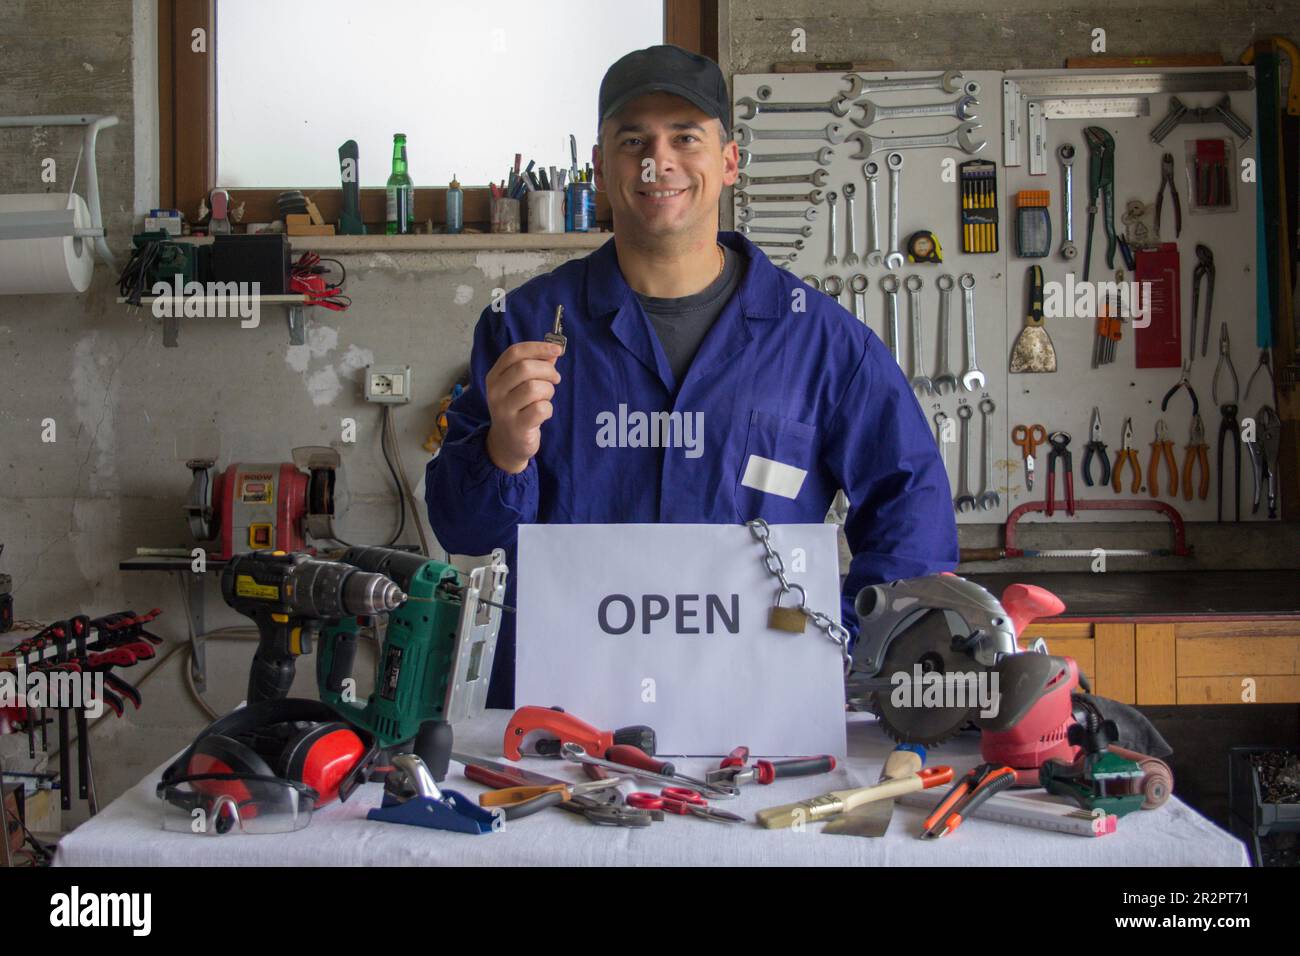 Image of a smiling handyman in his workshop with an OPEN sign and various work tools. Reopening of work activities and work development Stock Photo